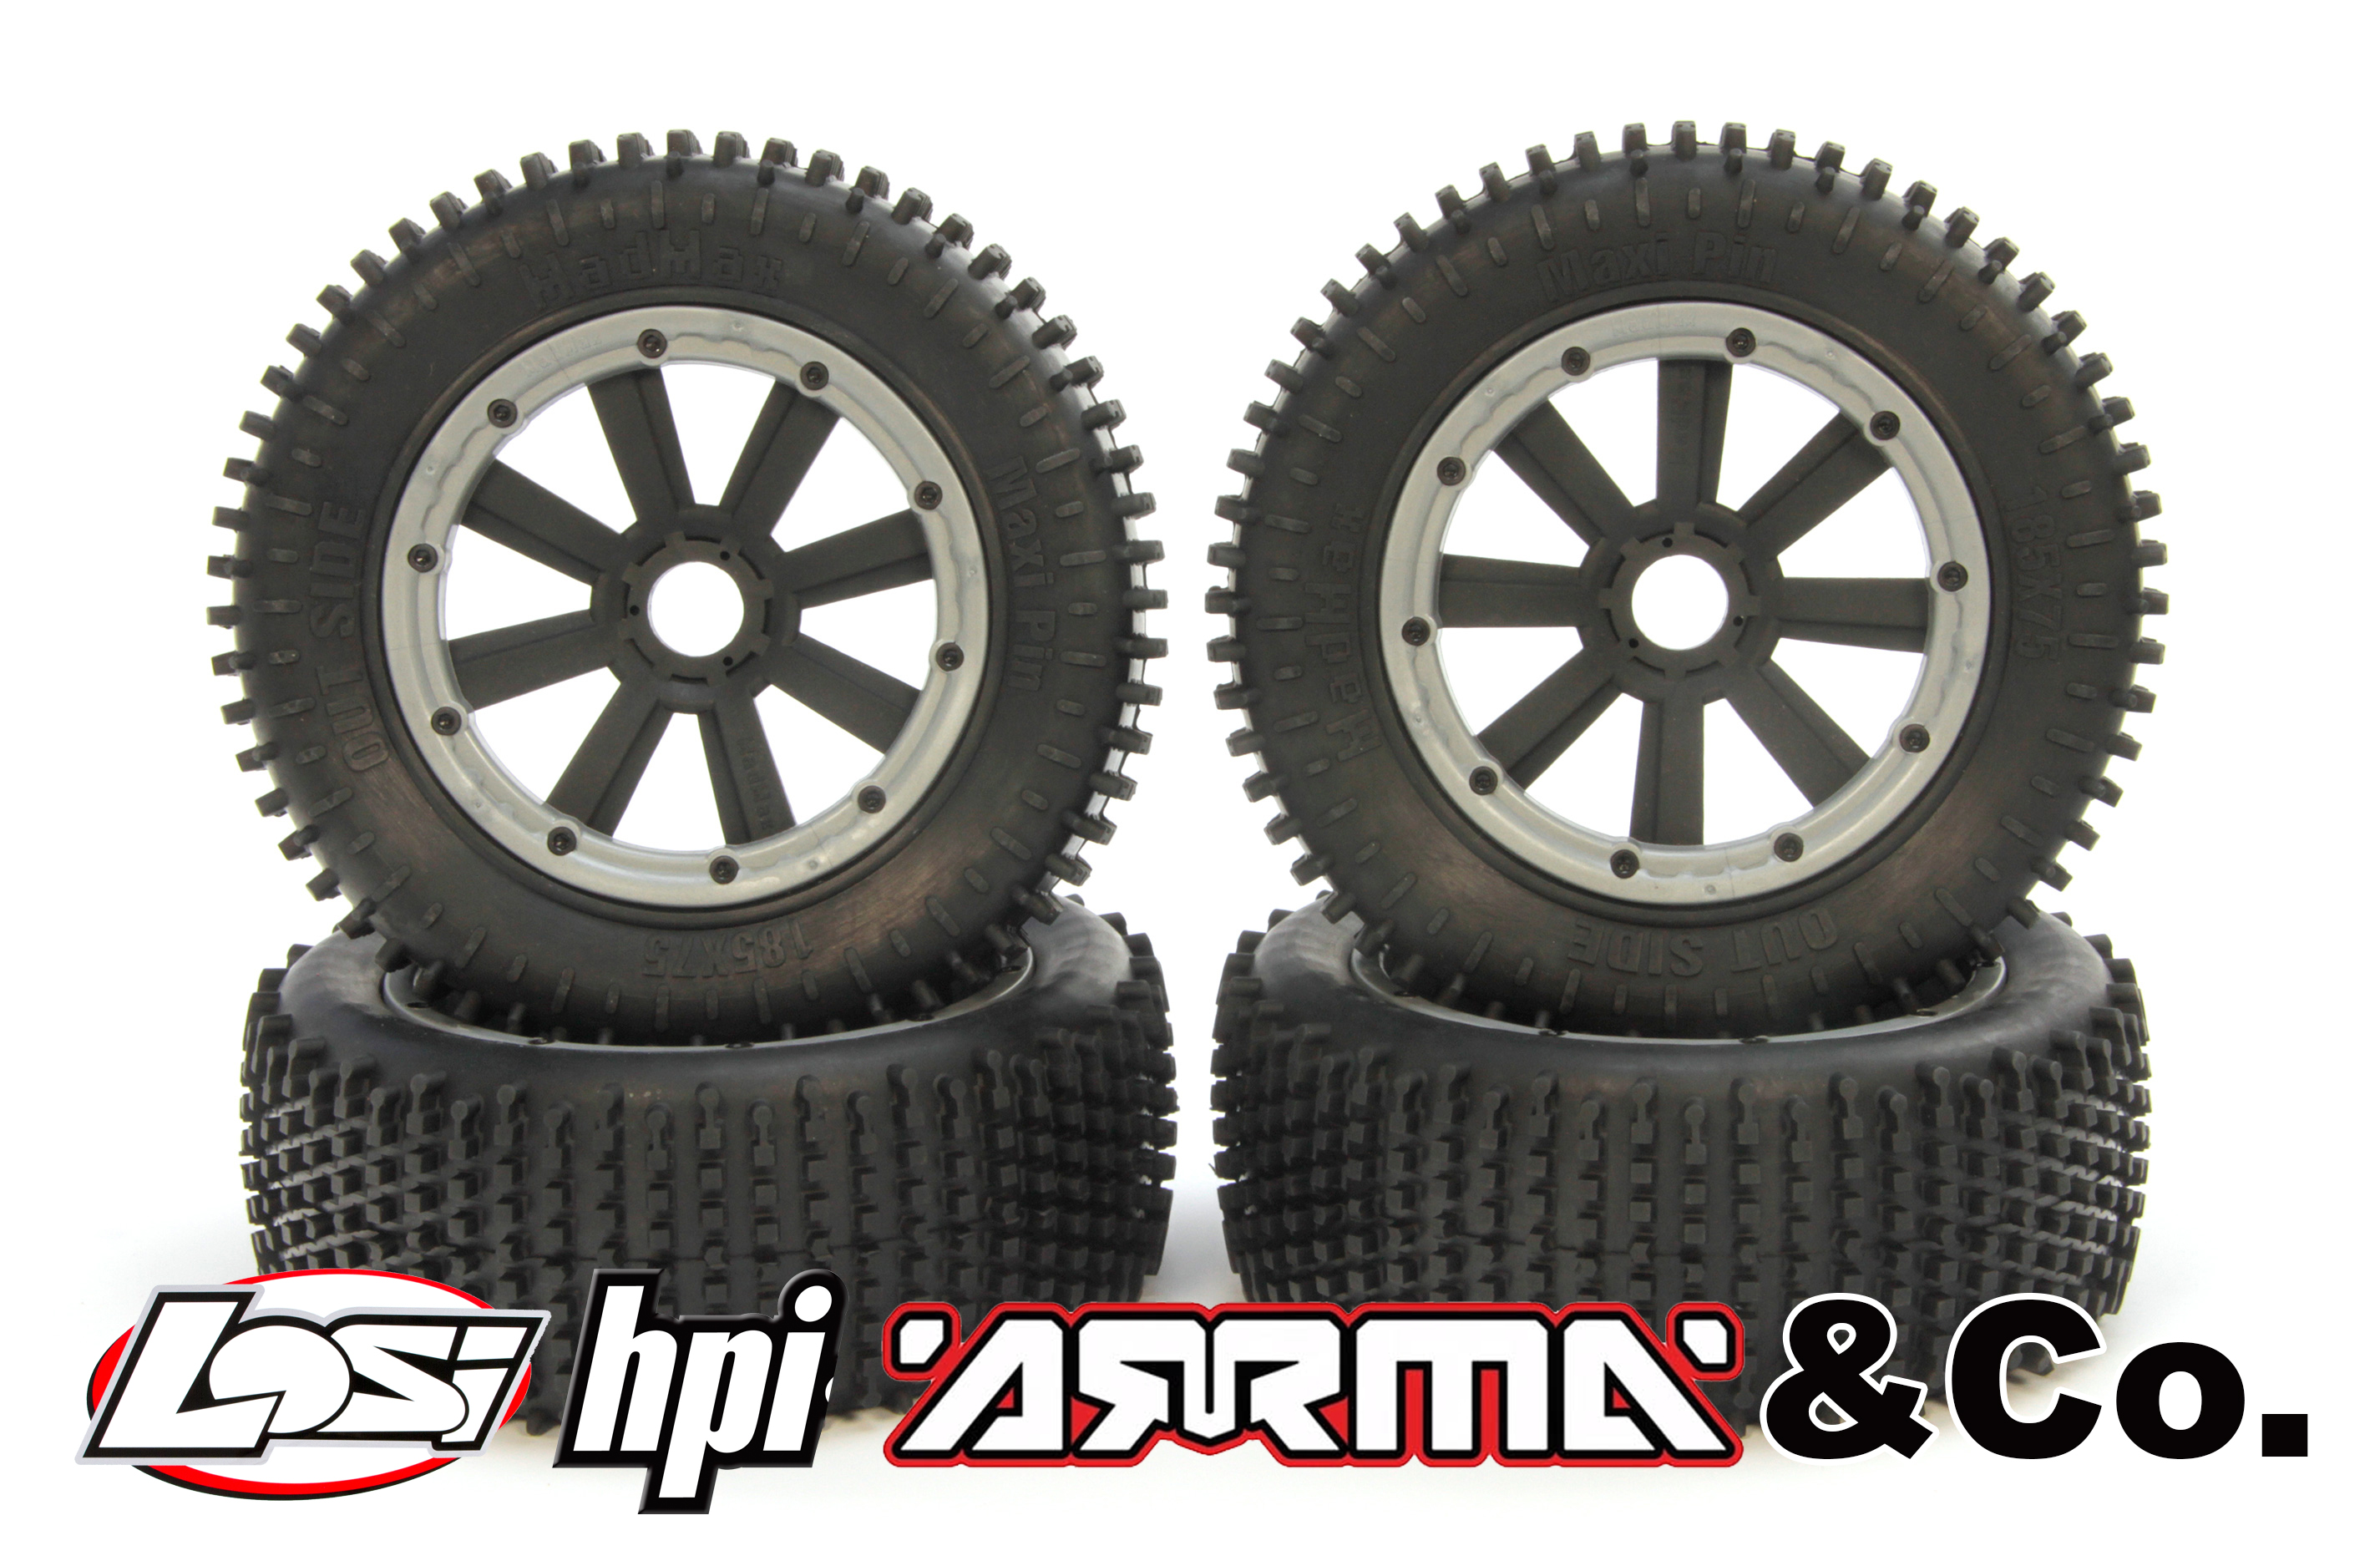 y1446/01 MadMax MAXI PIN tires for Losi and HPI (24 mm hex drive)